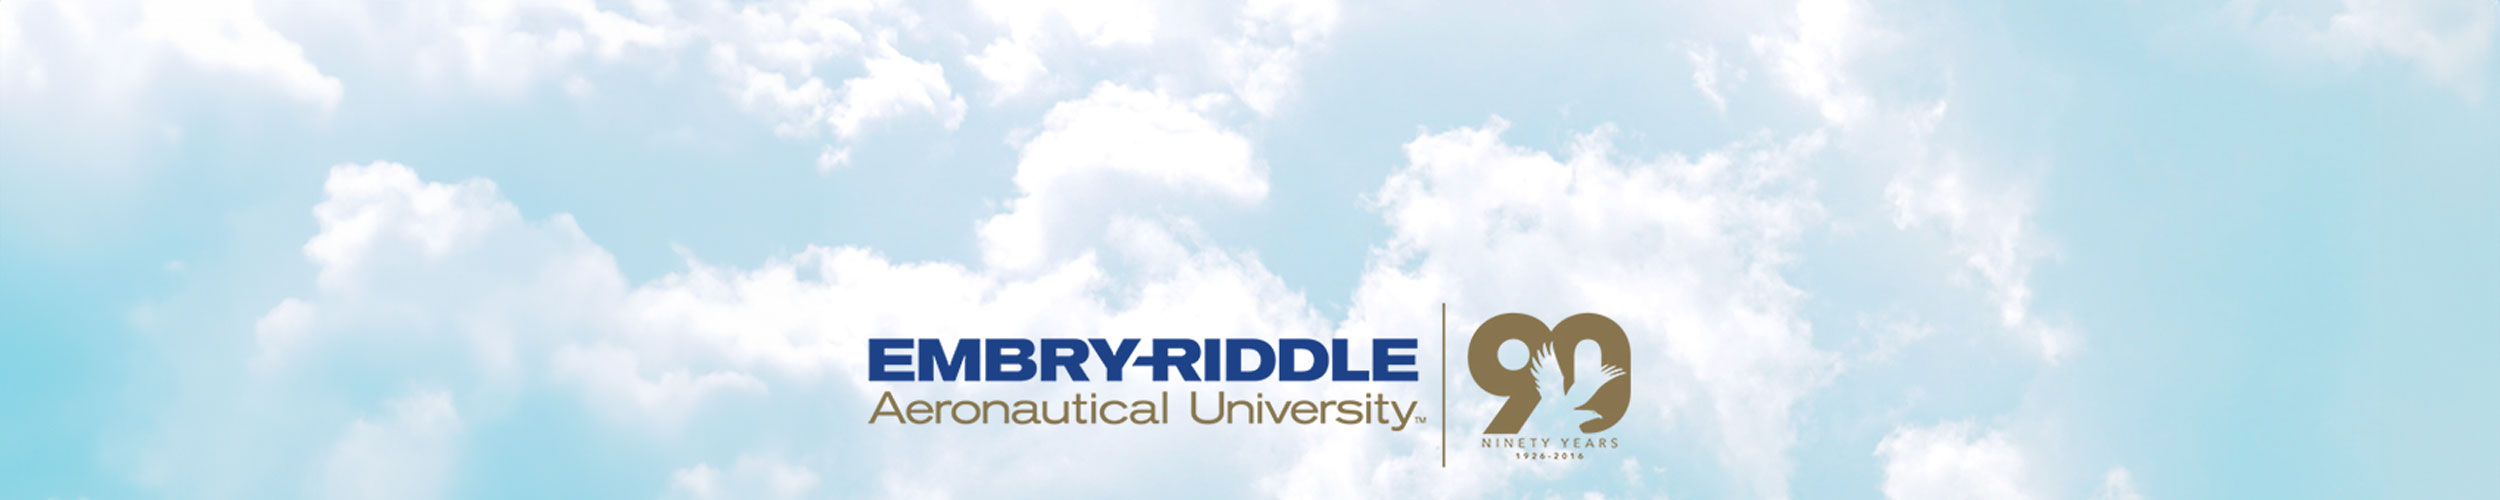 THE BLUE-GOLD CONNECTION WITH EMBRY-RIDDLE